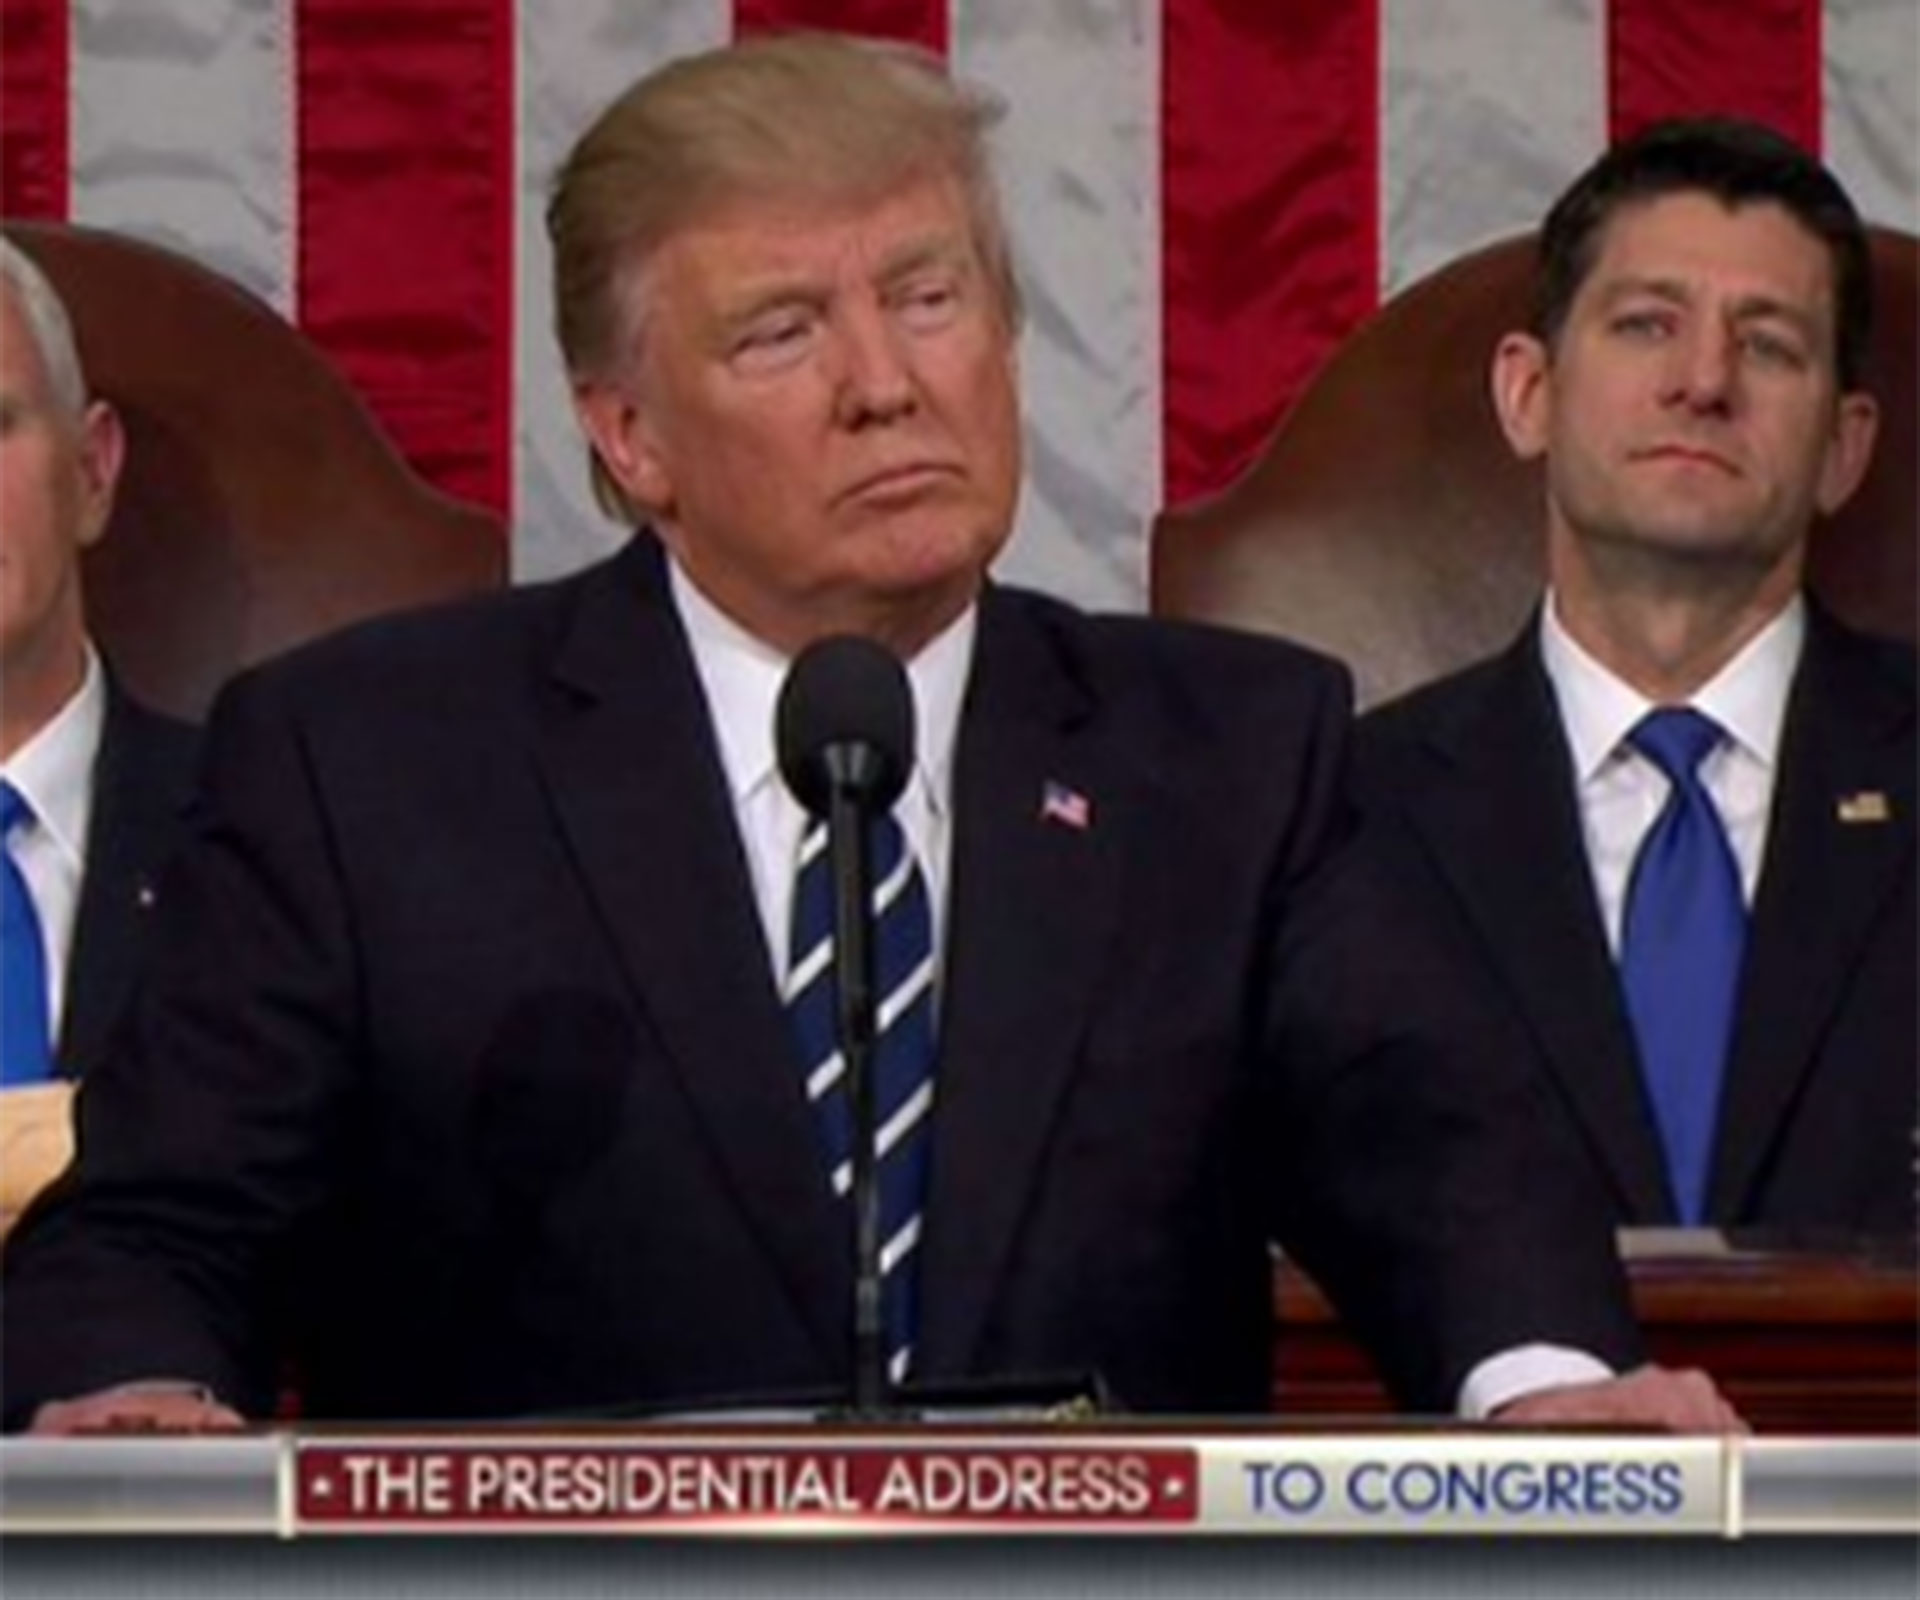 Donald Trump’s first Congressional Address was filled with emotional propaganda